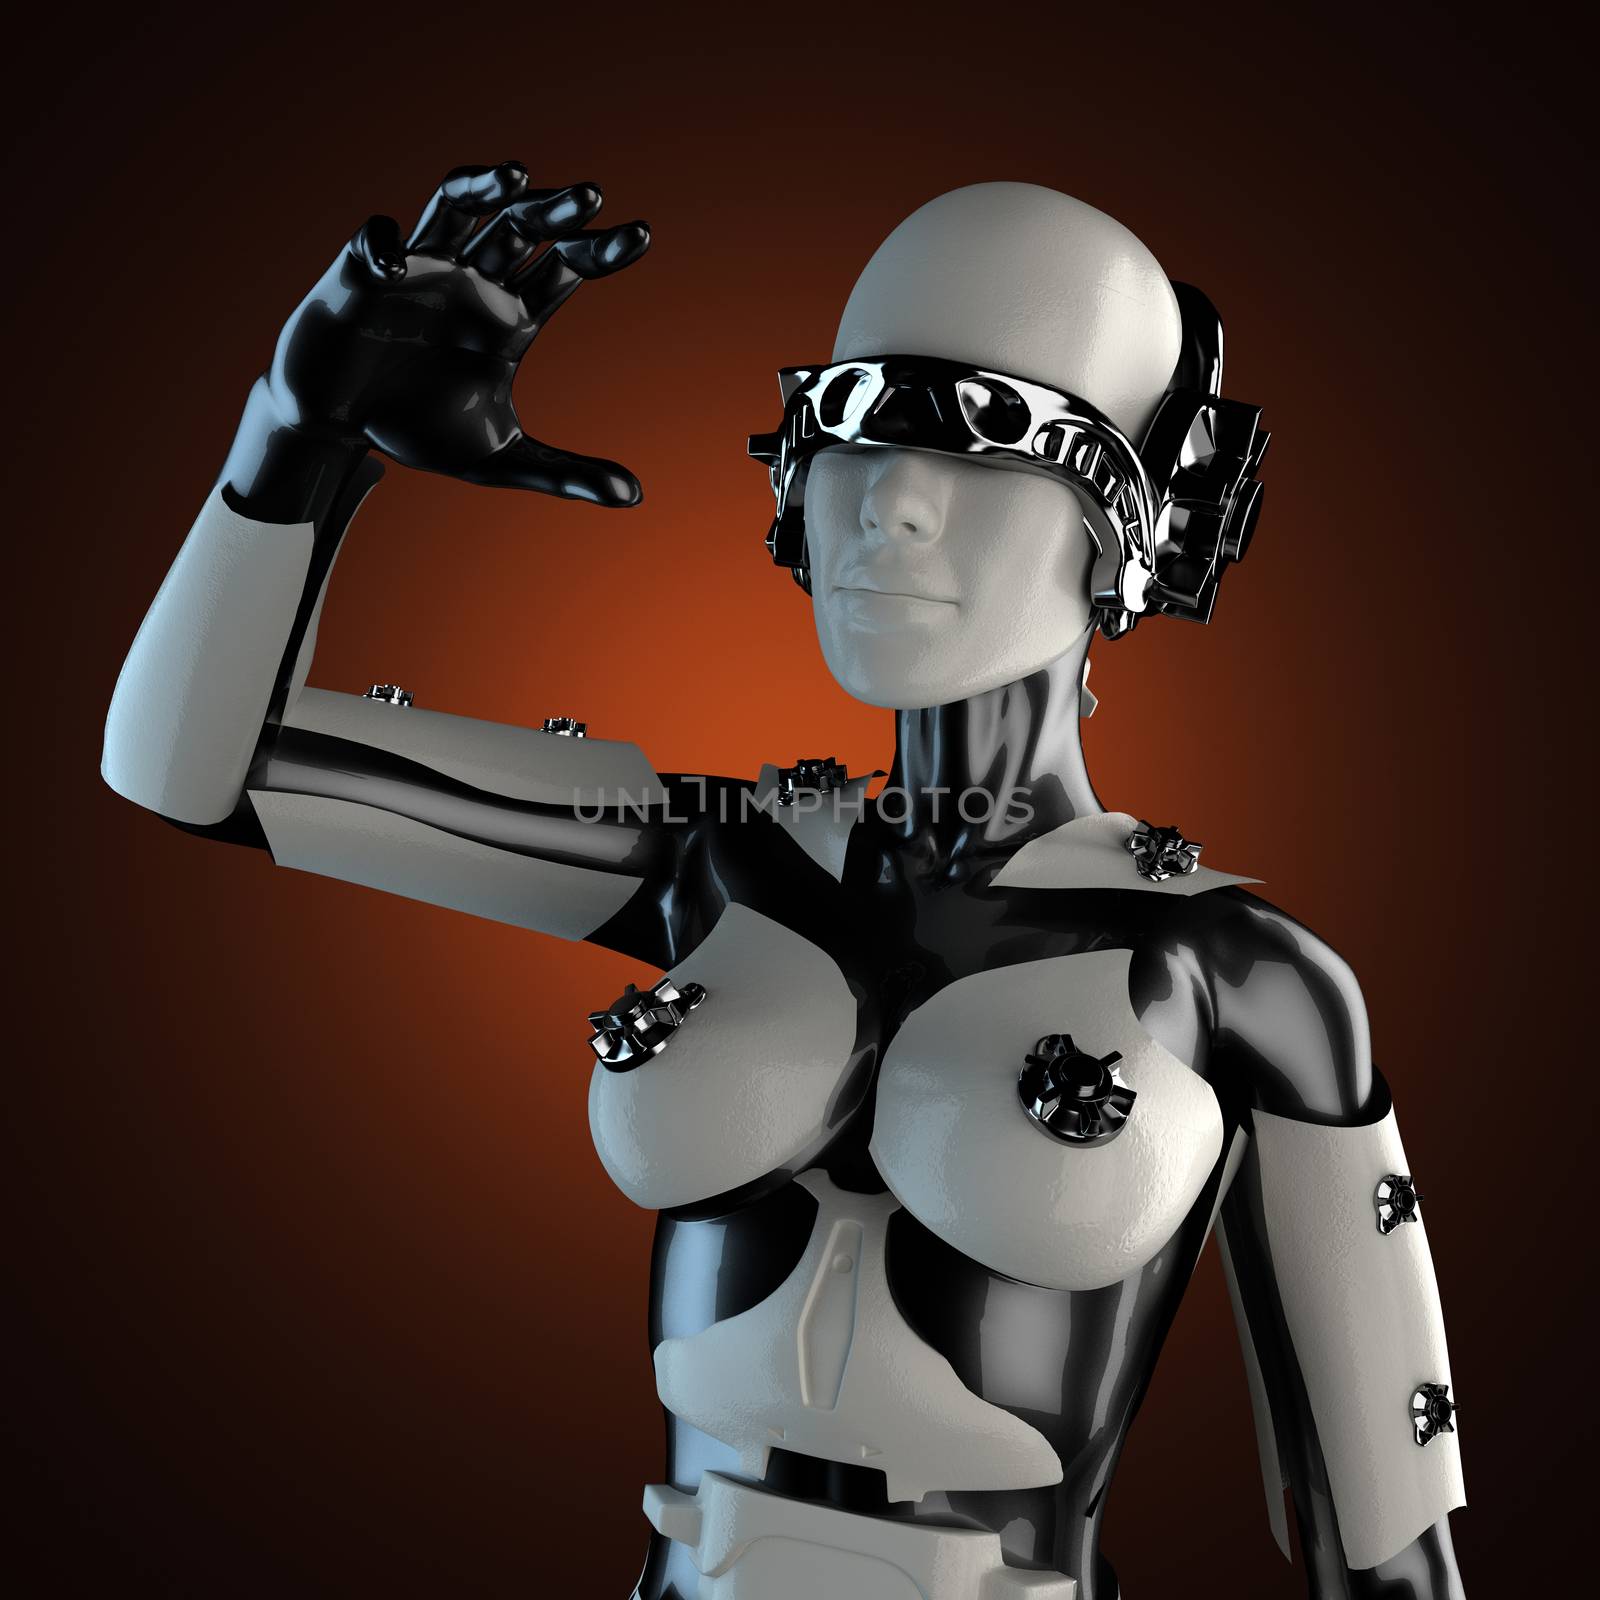 woman cyborg of steel and white plastic